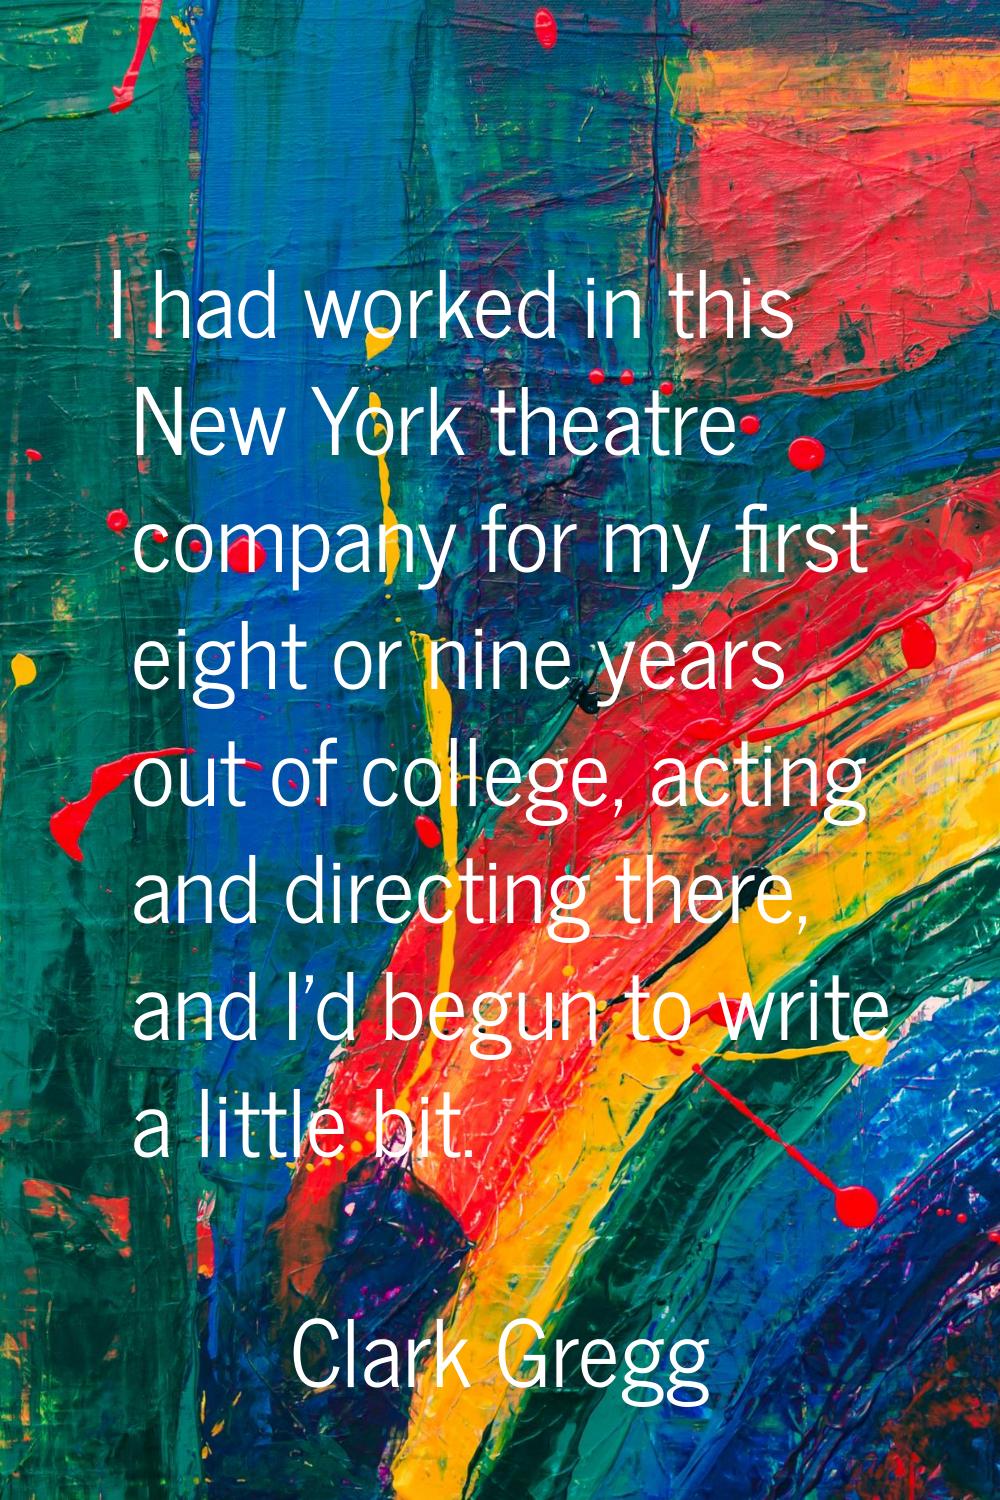 I had worked in this New York theatre company for my first eight or nine years out of college, acti